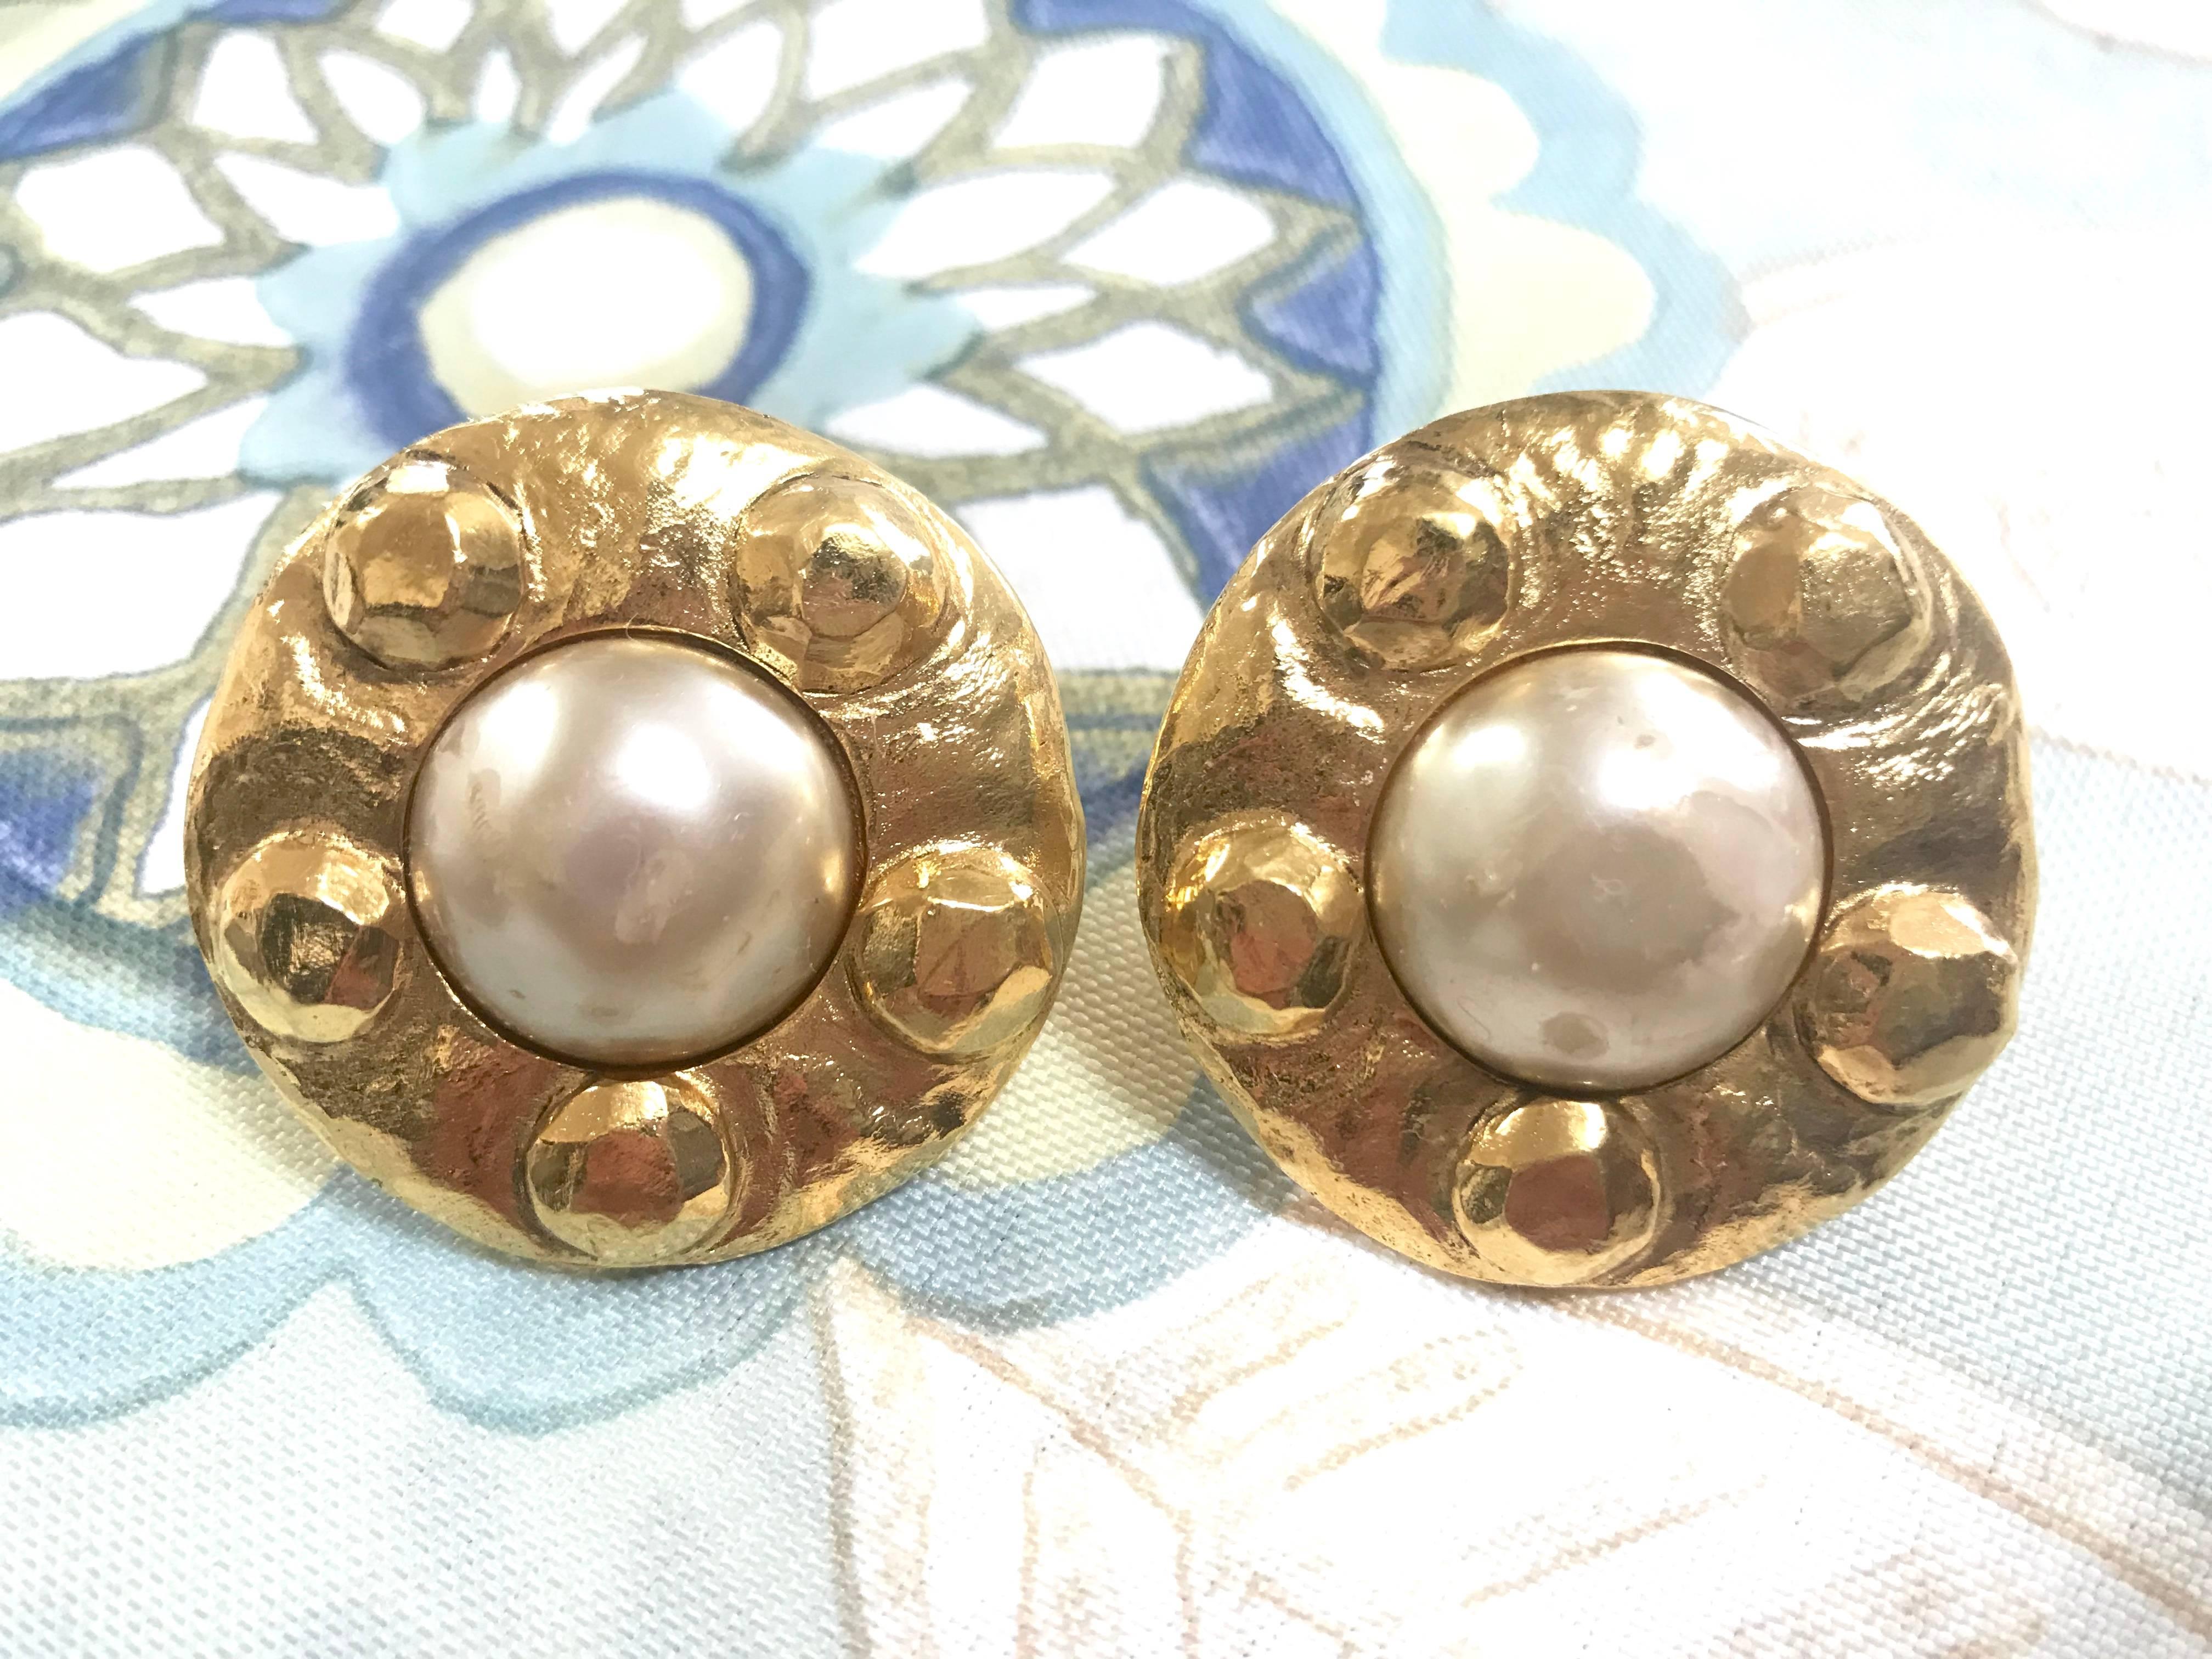 1990s. Vintage CHANEL gold tone large round earrings with faux pearl. Classic jewelry.

Introducing a beautiful pair of classic round design vintage Chanel earrings that feature faux pearl at center.                    

The large earrings will make